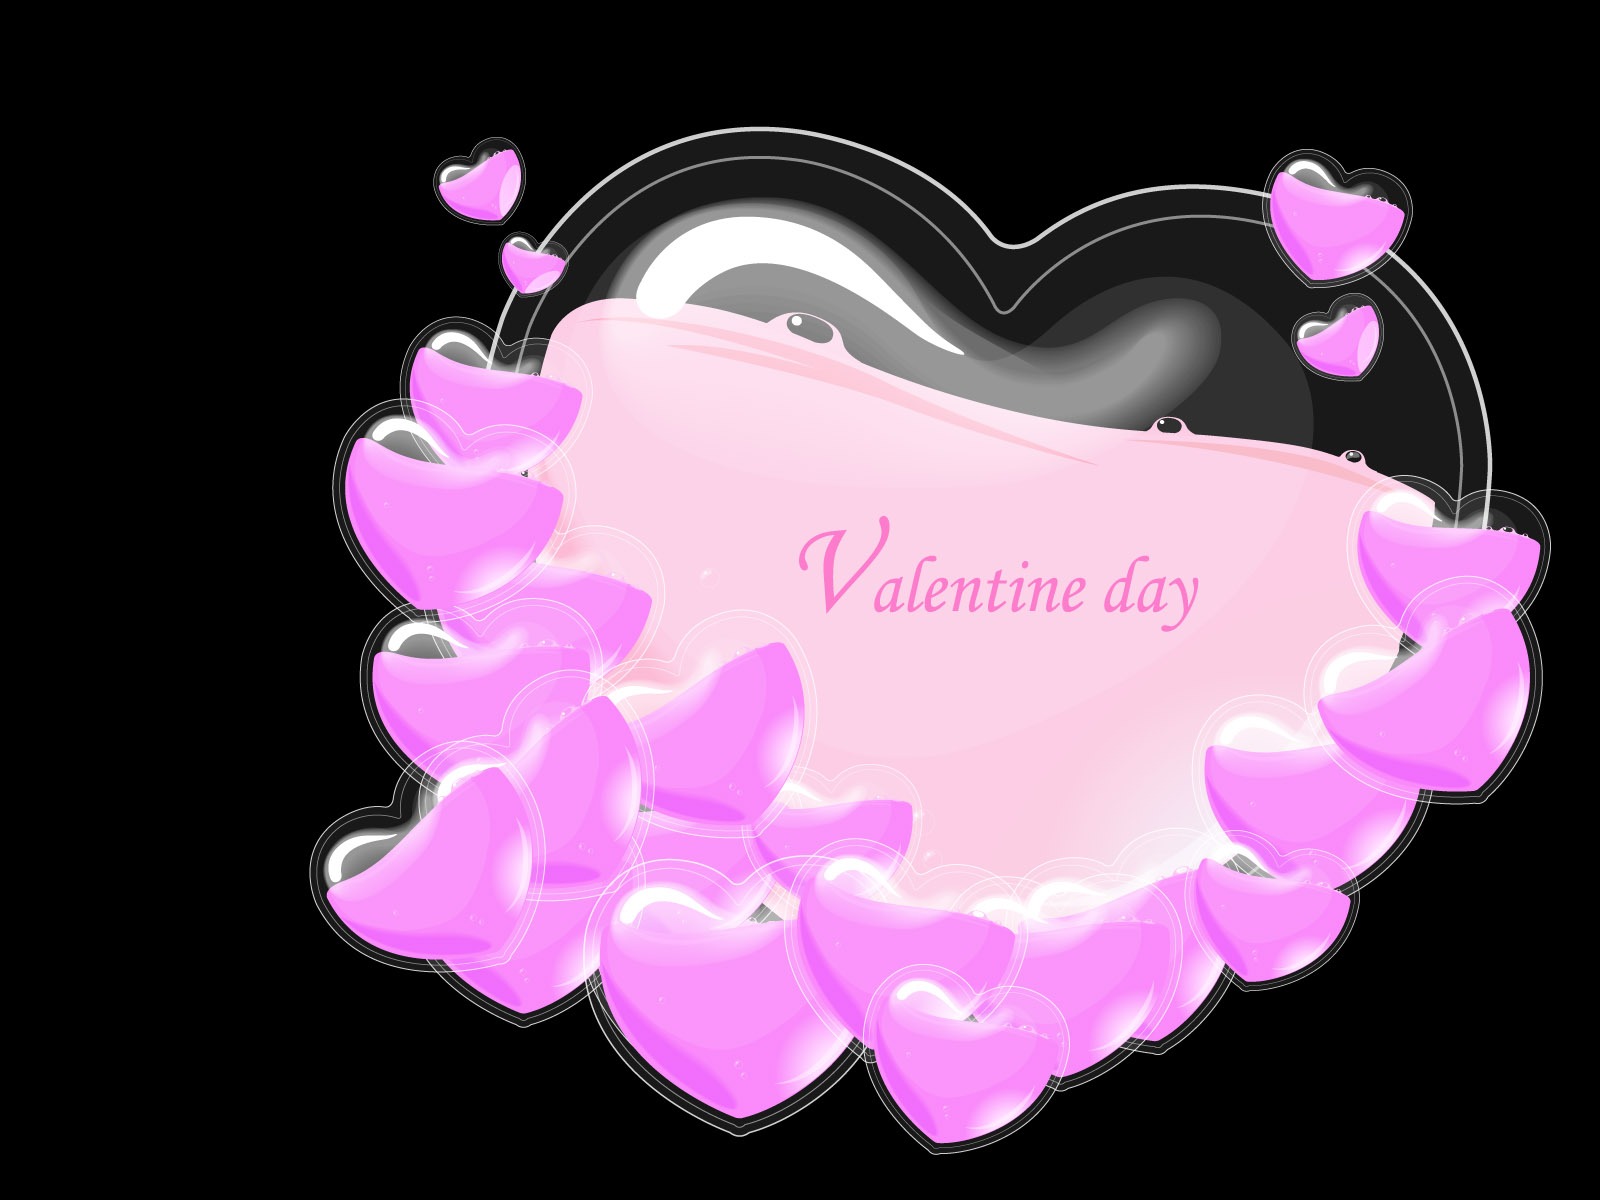 Valentine's Day Theme Wallpapers (2) #8 - 1600x1200